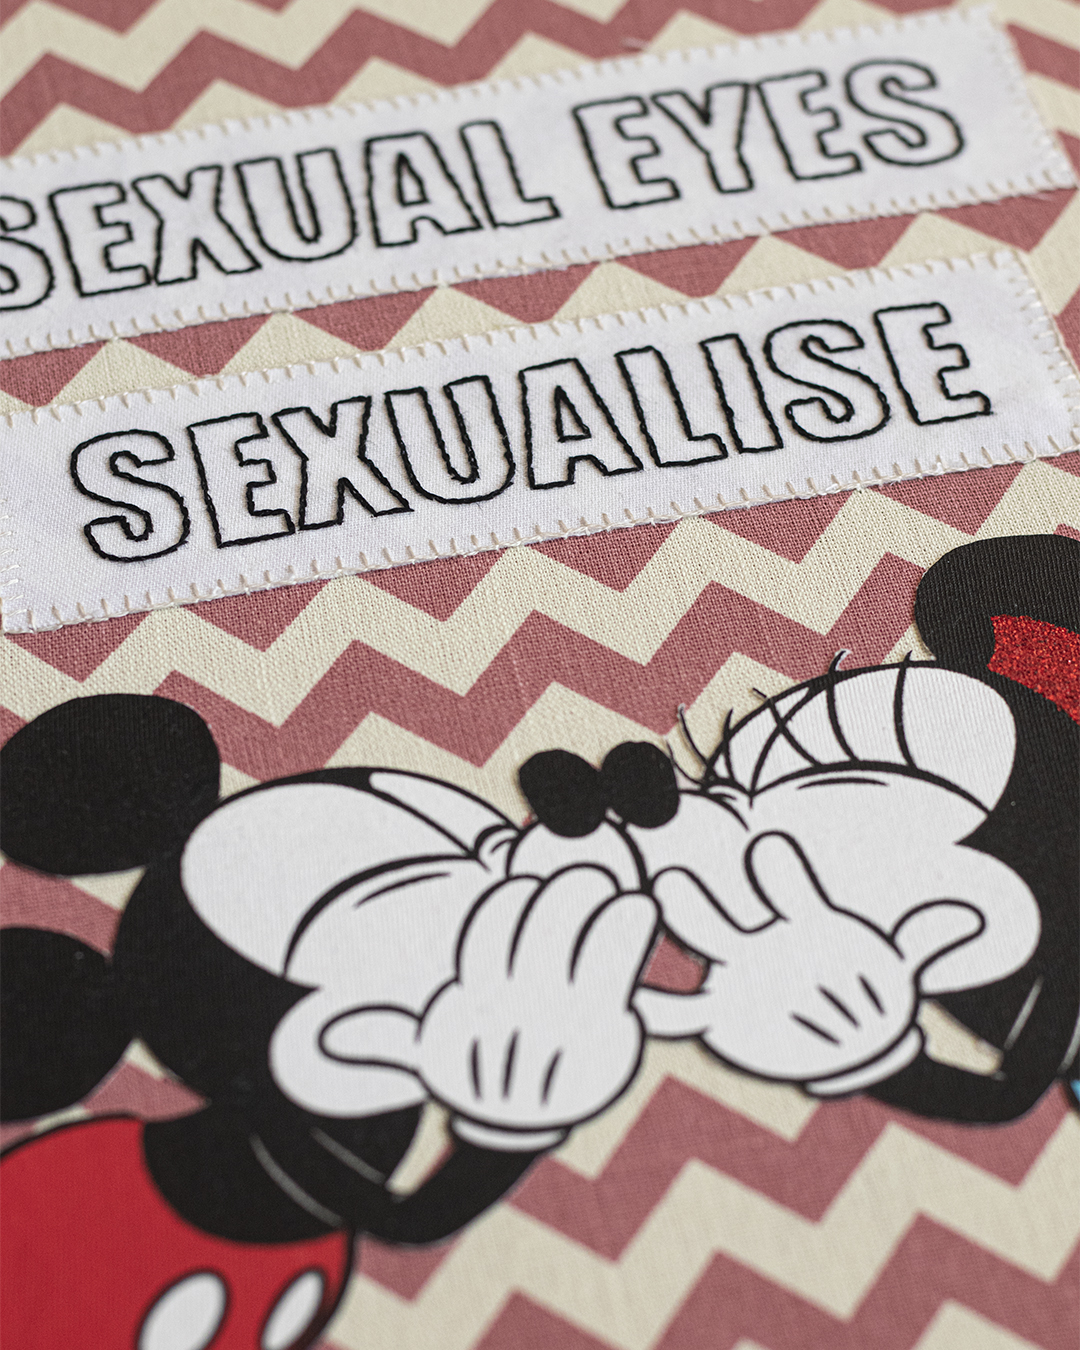 A close up of an ambroidered artwork called Sexual Eyes, Sexualise, Sexual Lies